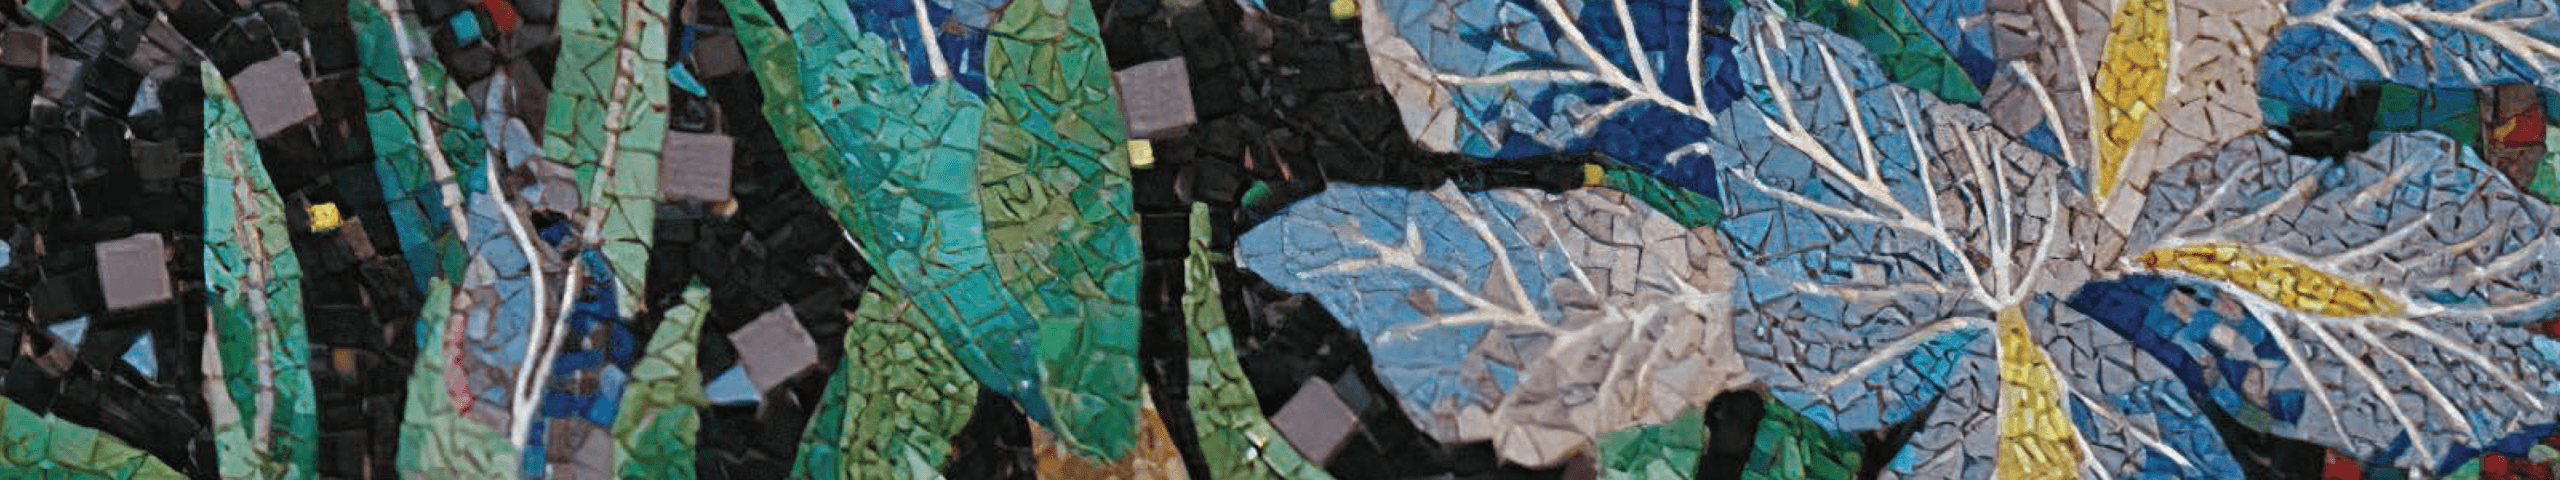 Mercy mosaic closeup image used for invitation and fundraising events branding, marketing, and corporate identity